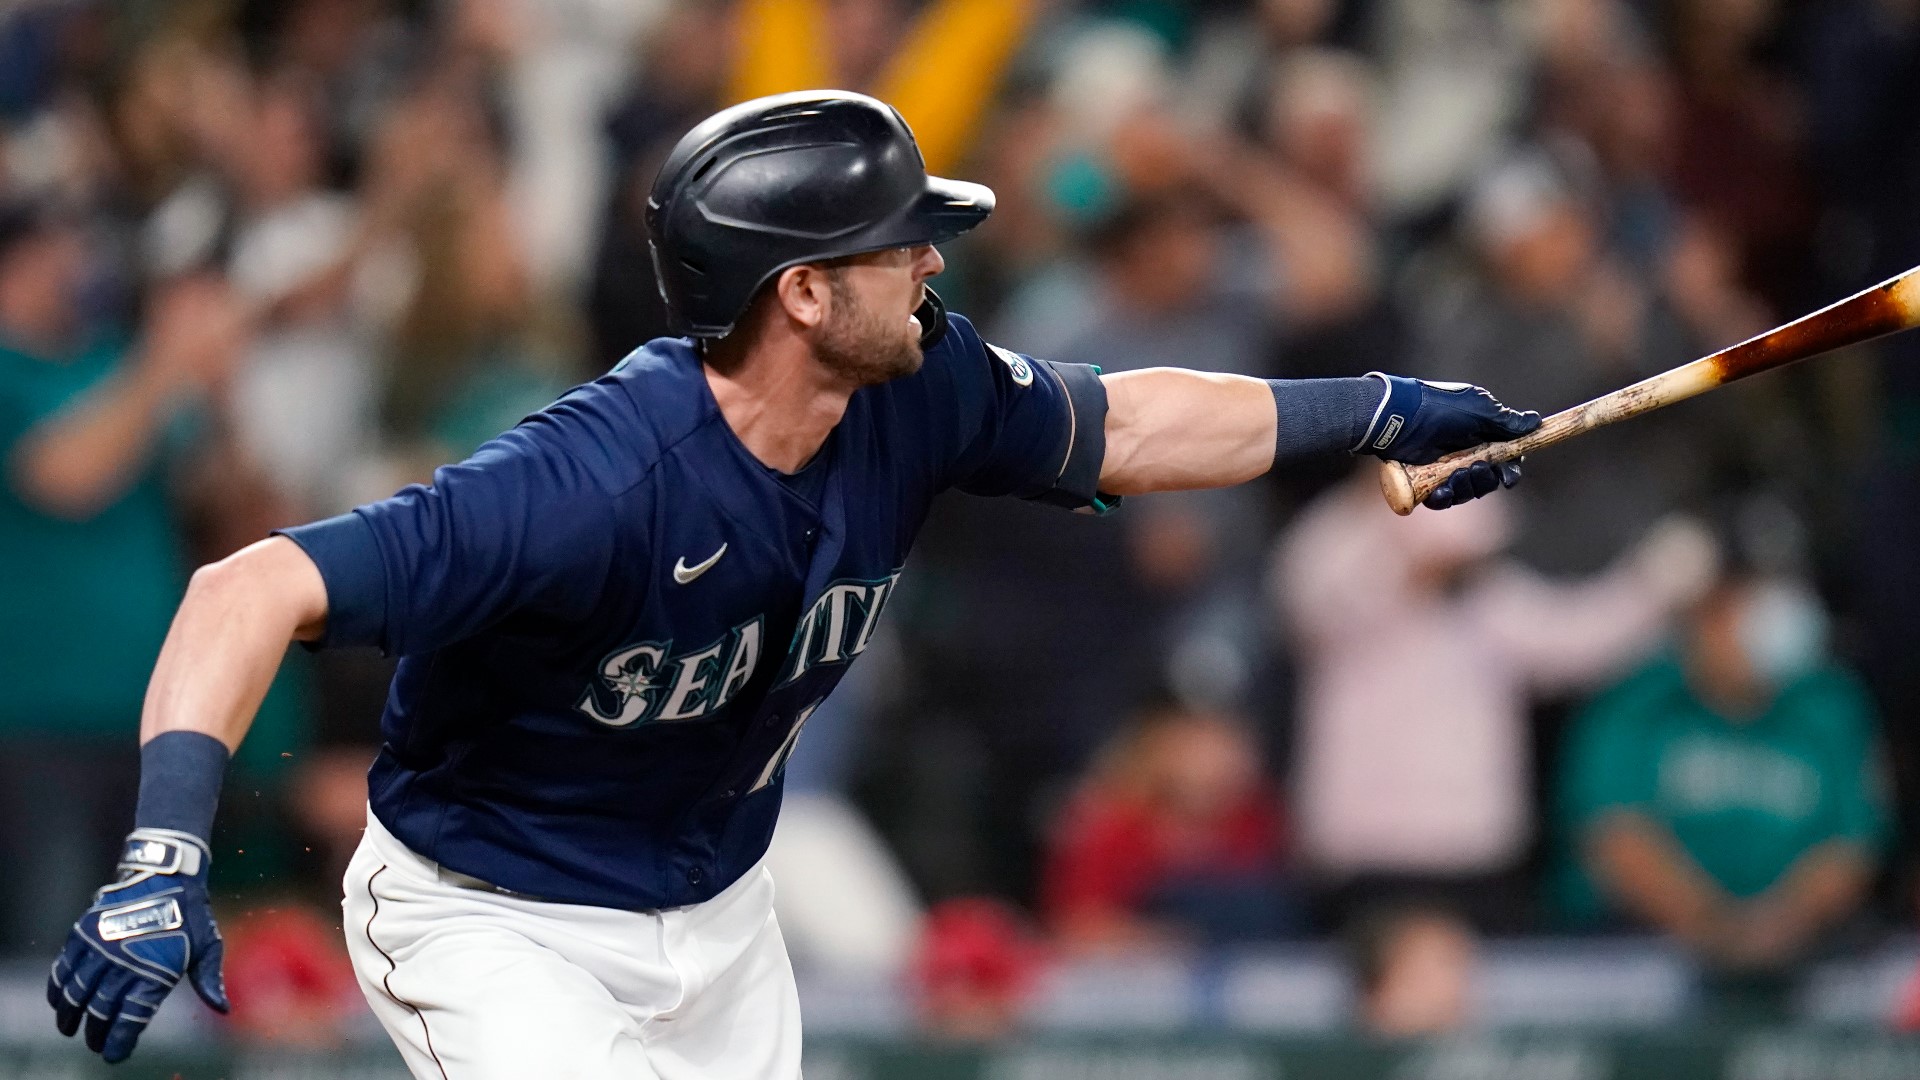 The Mariners beat the Angels six to four in front of a sold-out crowd Saturday in their bid for a spot in the postseason.